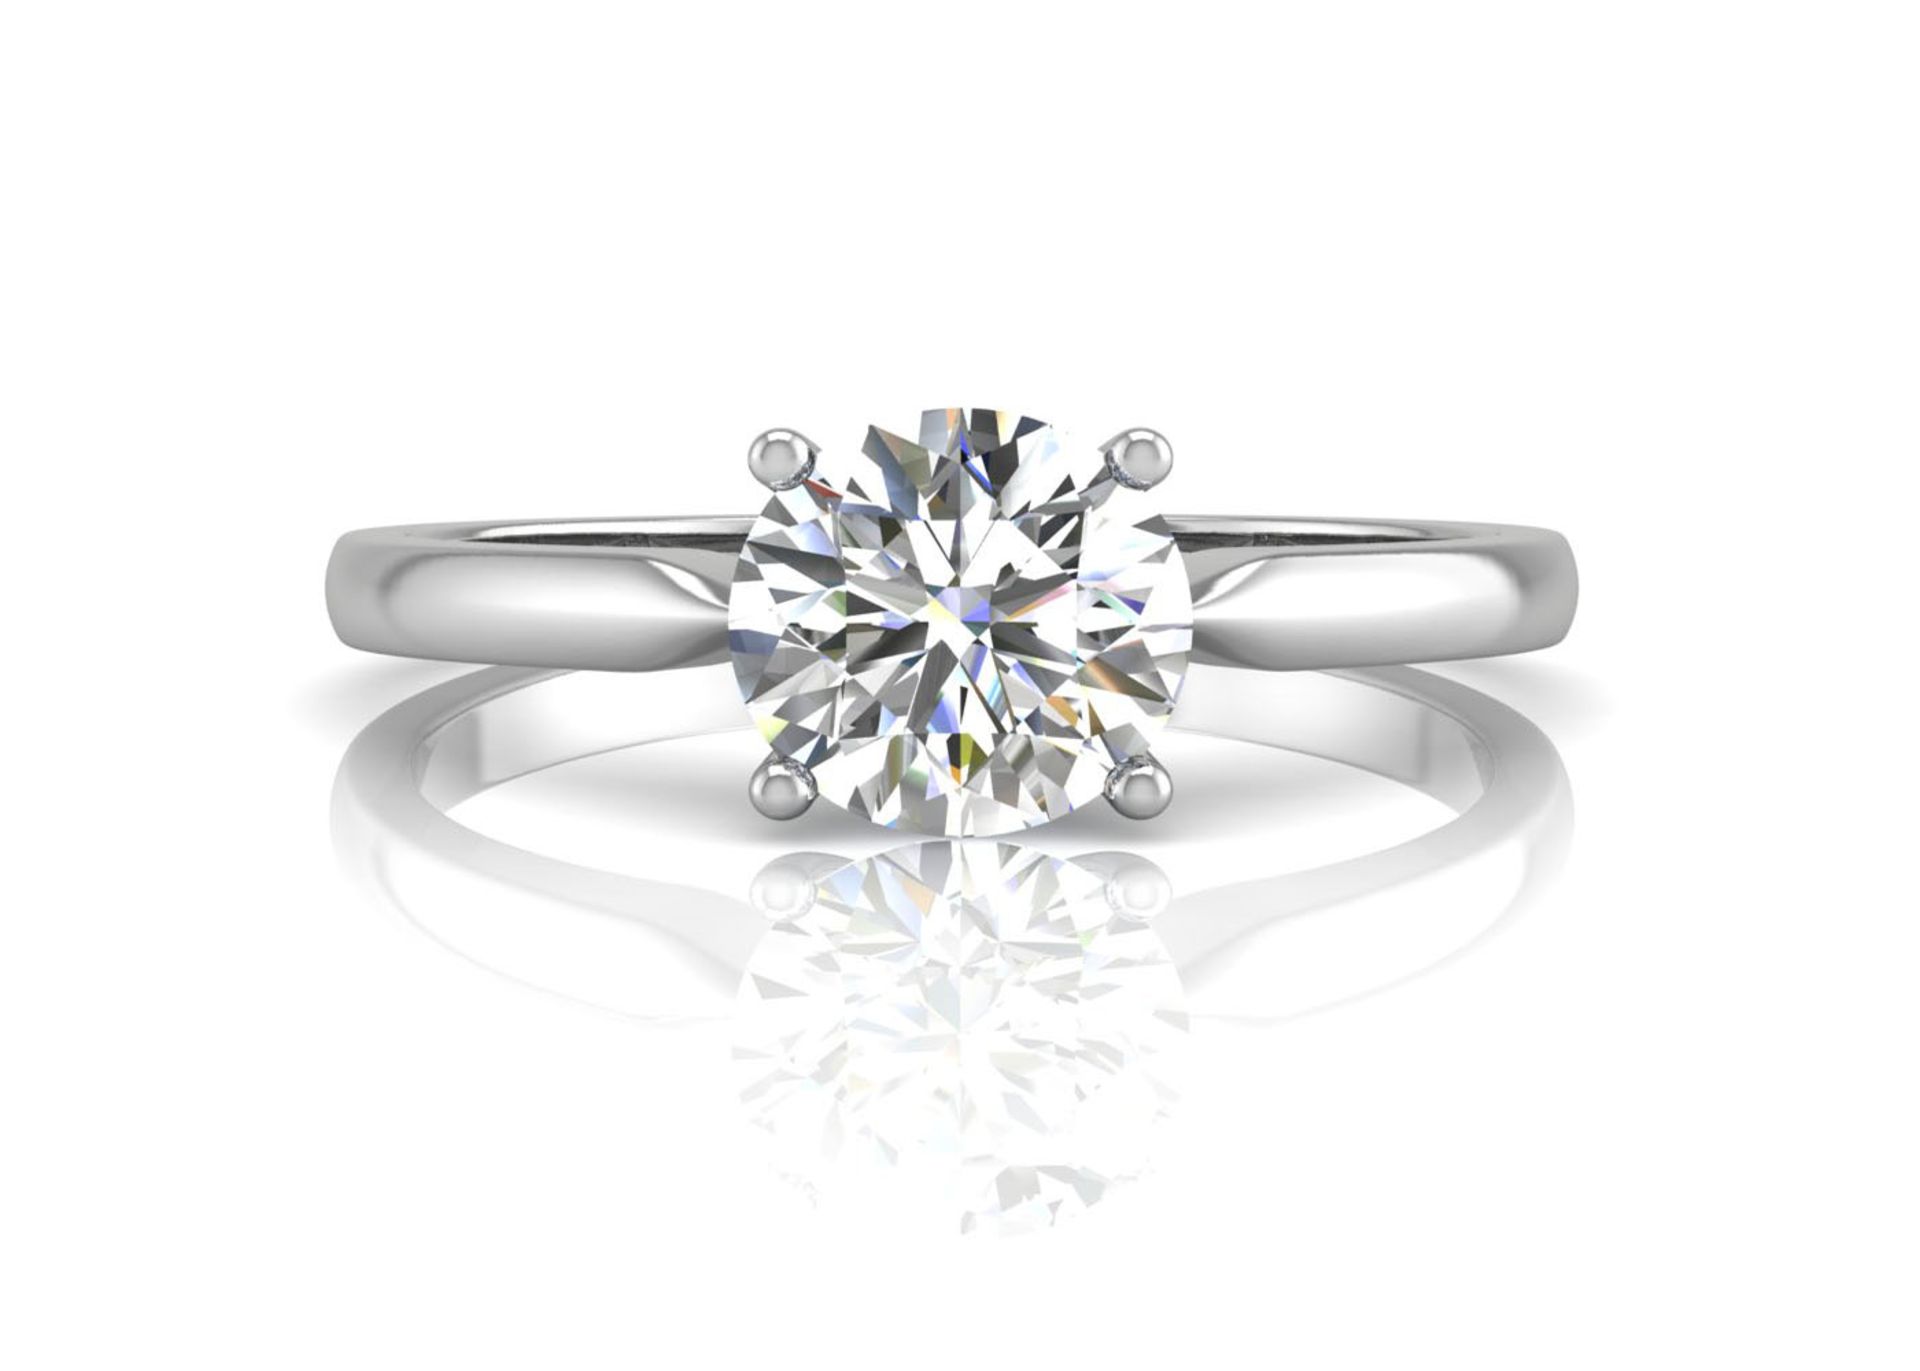 18ct White Gold Single Stone Diamond Engagement Ring 0.55 Carats - Valued by AGI £8,955.00 - A - Image 3 of 4